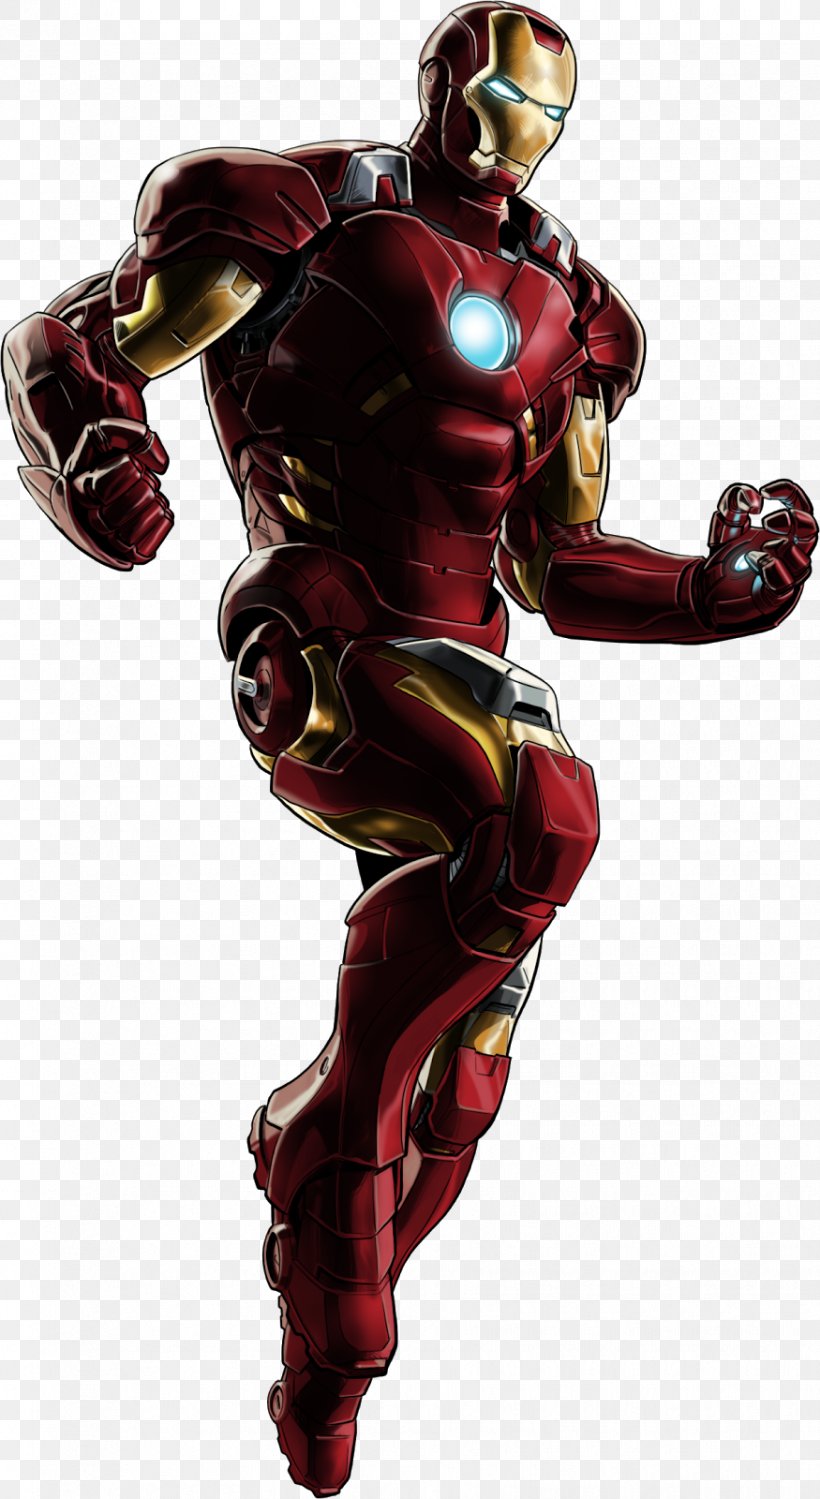 Marvel: Avengers Alliance Iron Man Thor Black Widow Marvel Cinematic Universe, PNG, 875x1600px, Marvel Avengers Alliance, Action Figure, Art, Avengers, Avengers Age Of Ultron Download Free